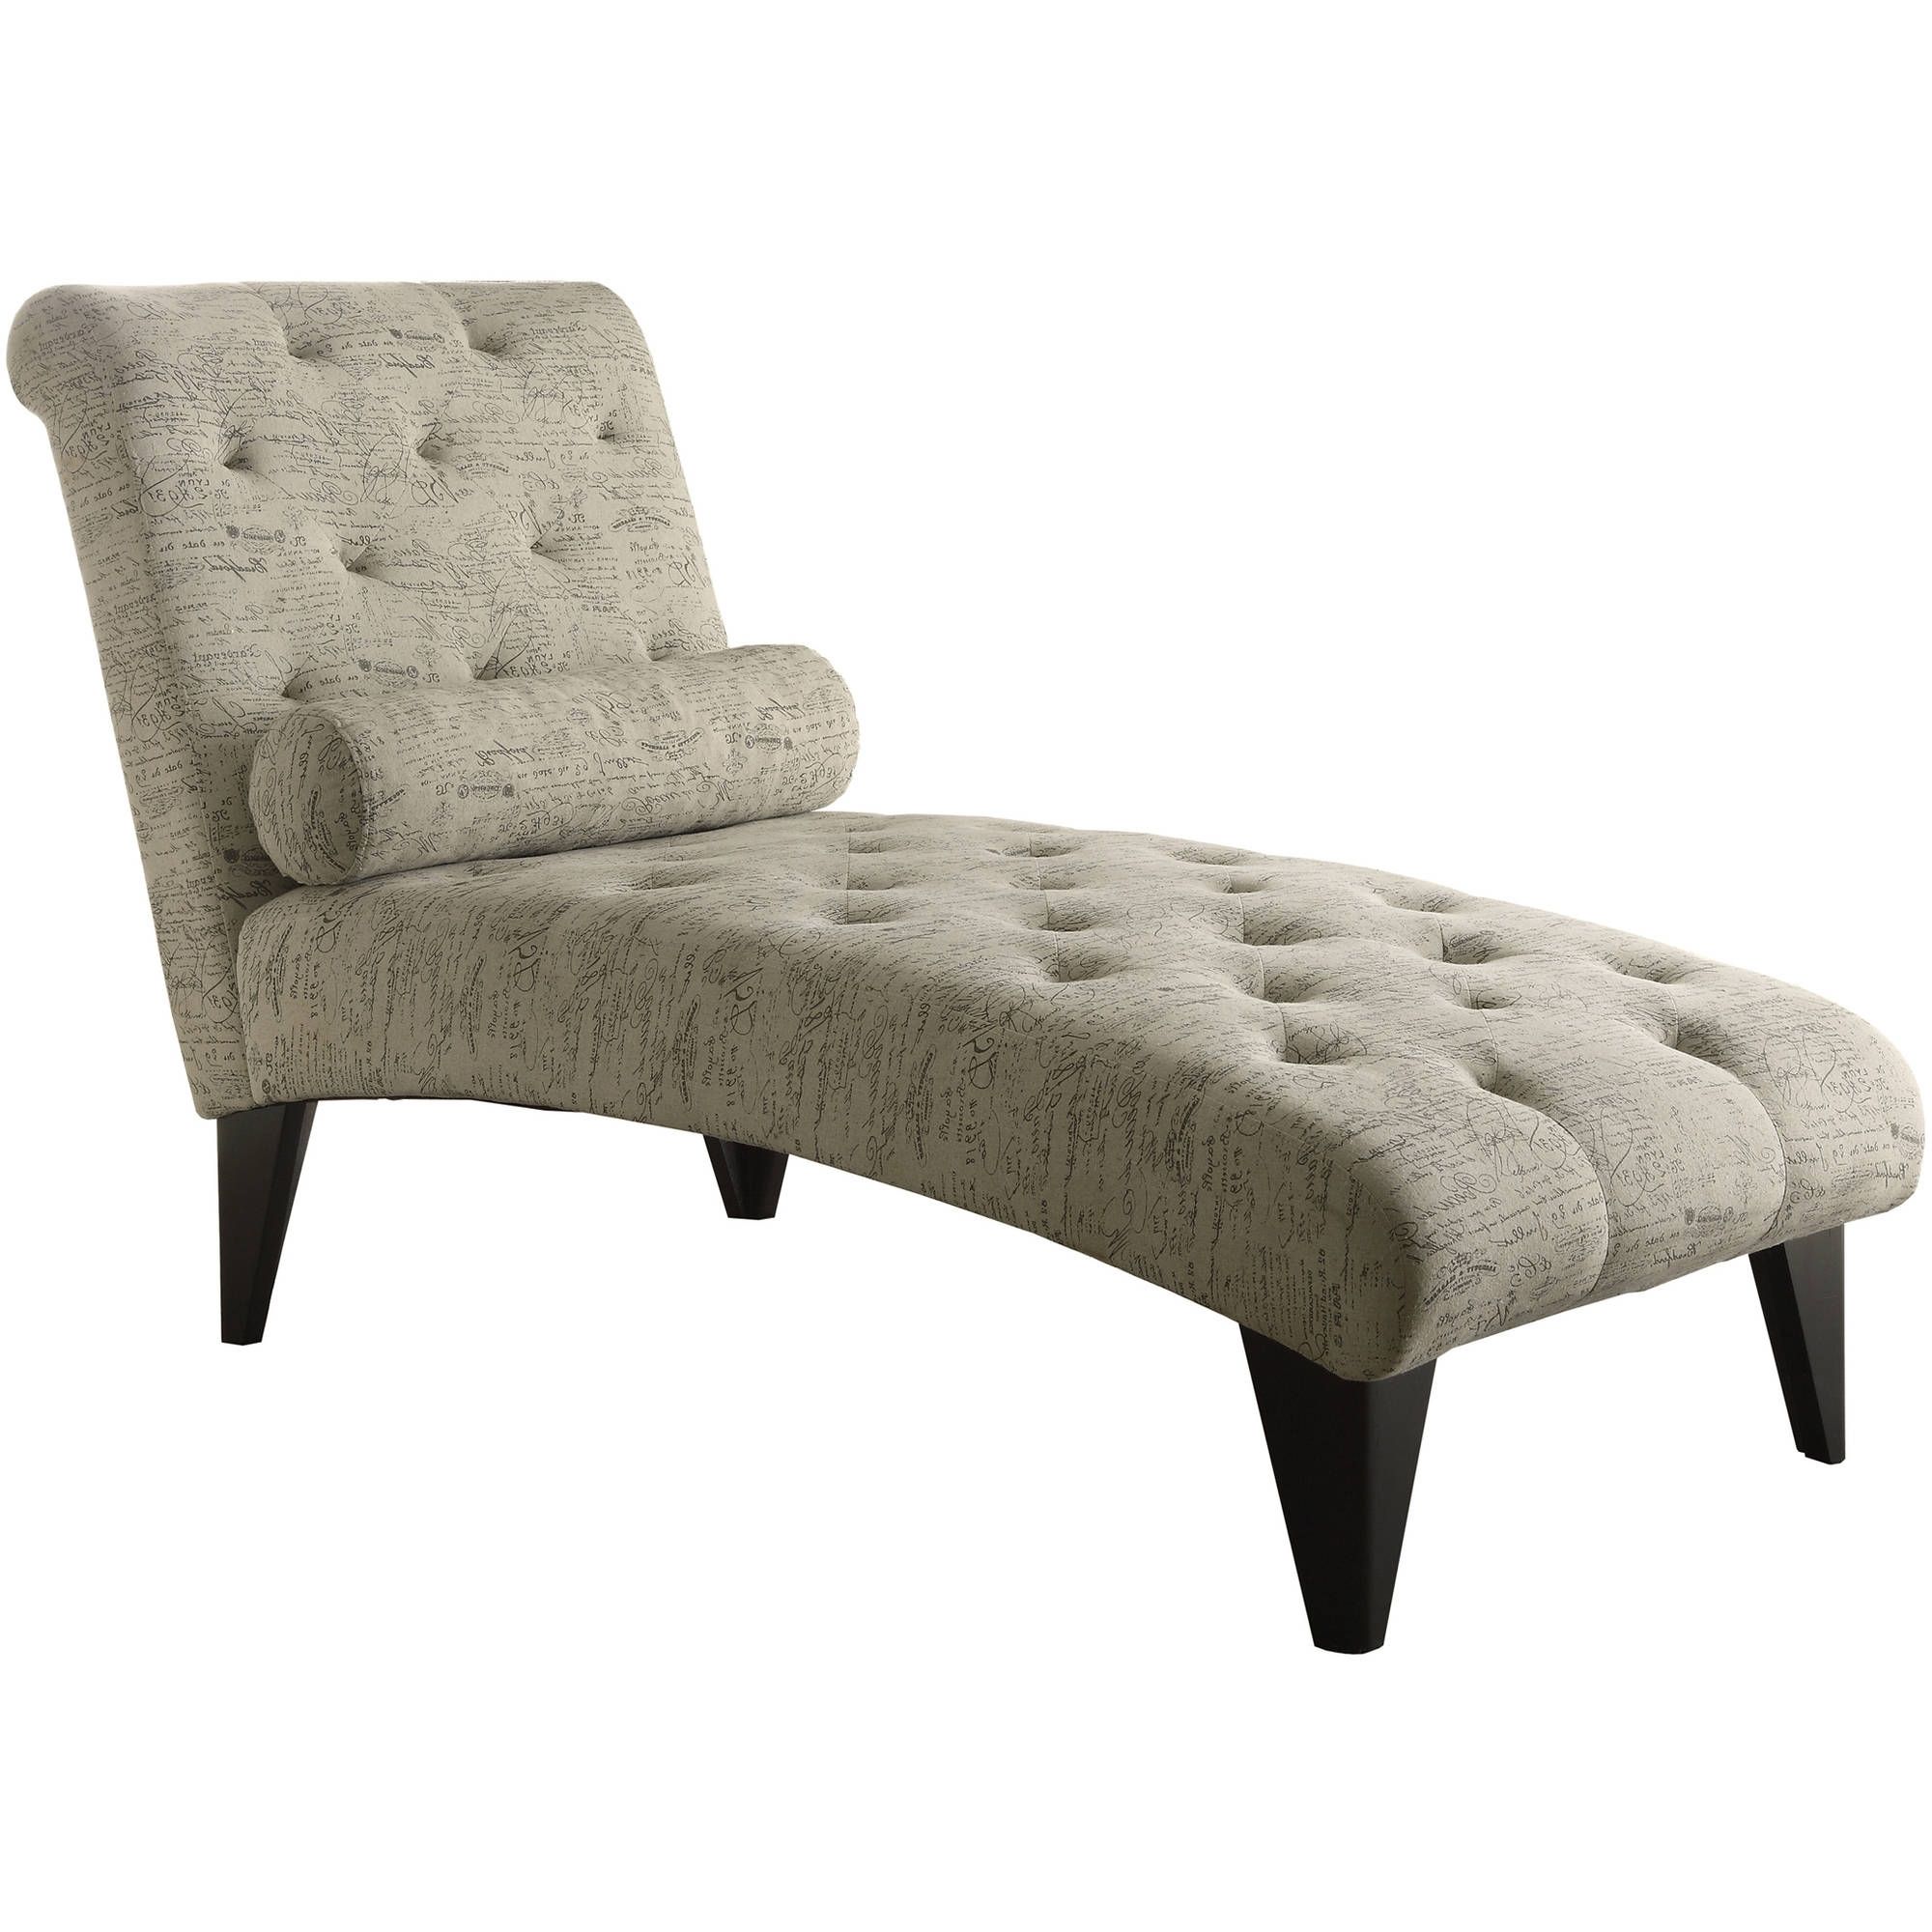 Chaise Lounges – Walmart With Regard To Widely Used Chaise Lounge Chairs Under $ (View 1 of 15)